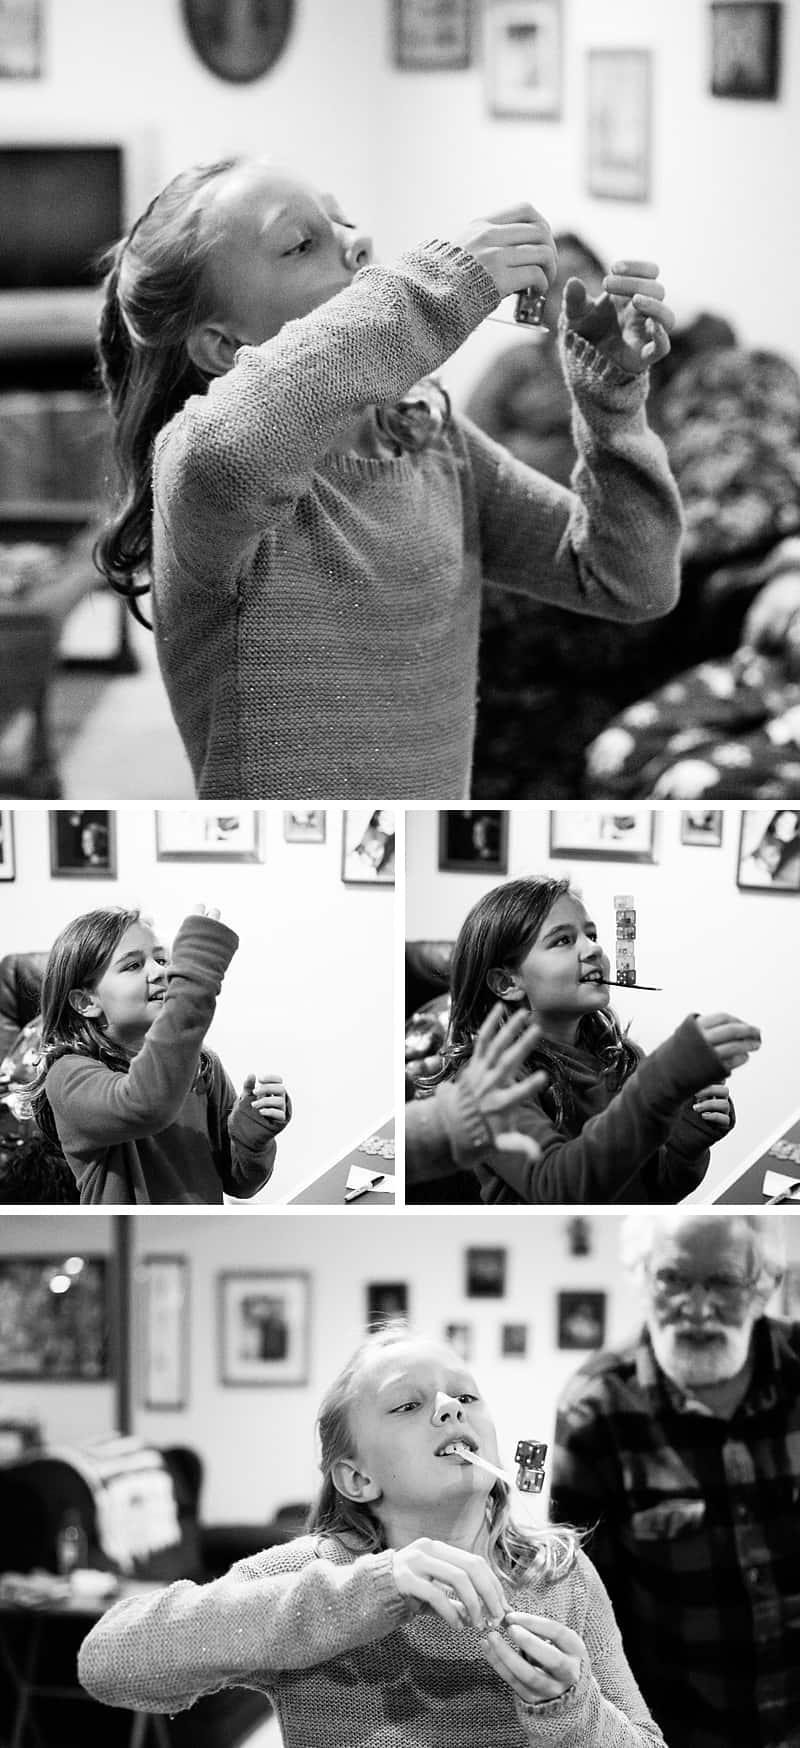 A collage of family members doing a family Christmas Game, Sugar, Spice & Everything Nice Challenge. Family members trying to balance six sugar cubes on a Popsicle stick held in their mouth.